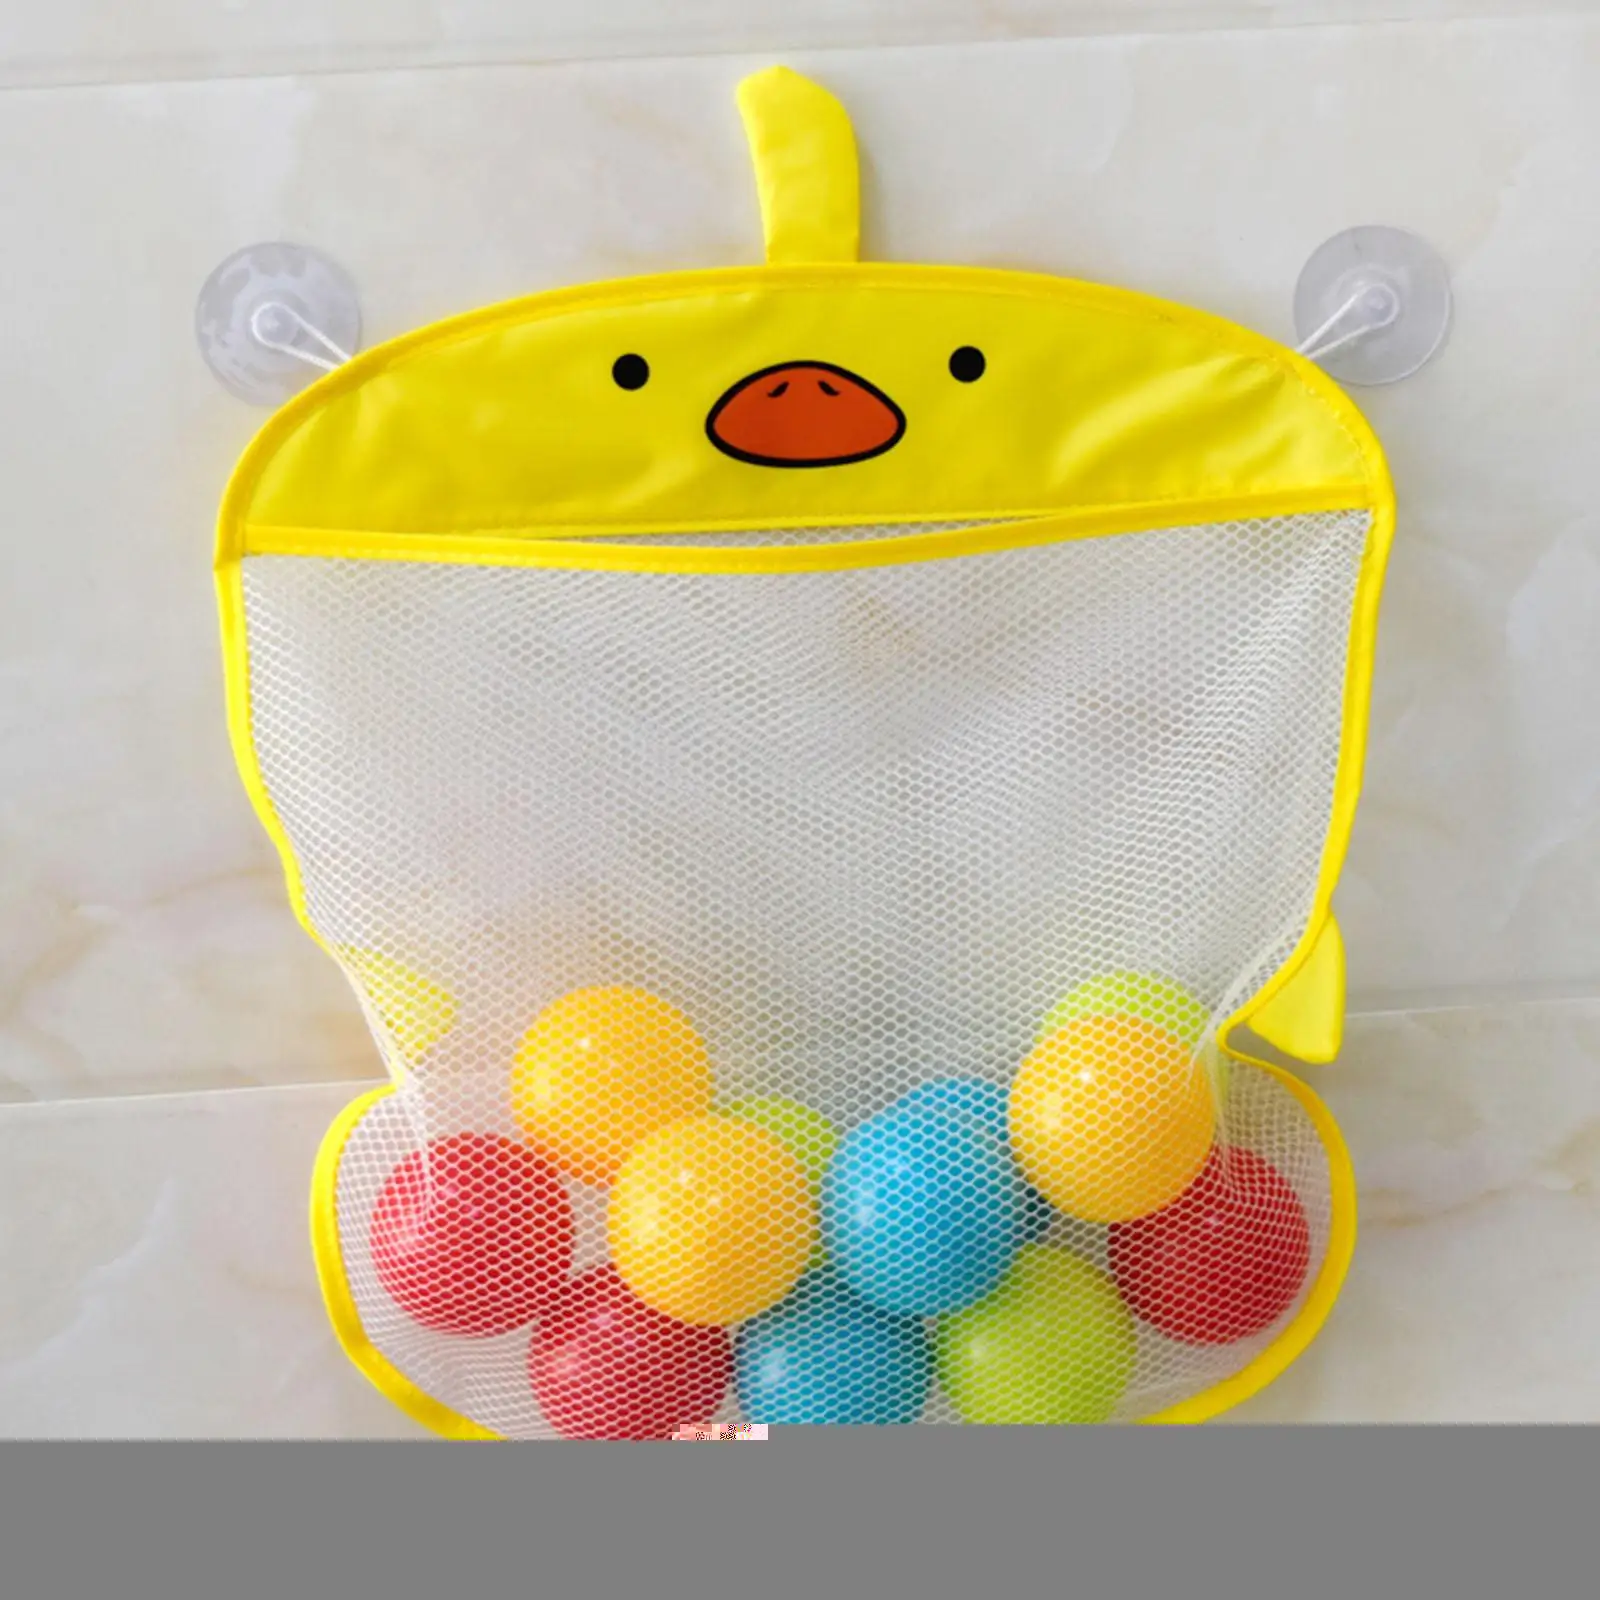 Hanging Toy Storage Mesh Bag Mesh Beach Bag with Suction Cups Quick Drying Toy Organizer Mesh Bag for Boys Girls Toddlers Baby